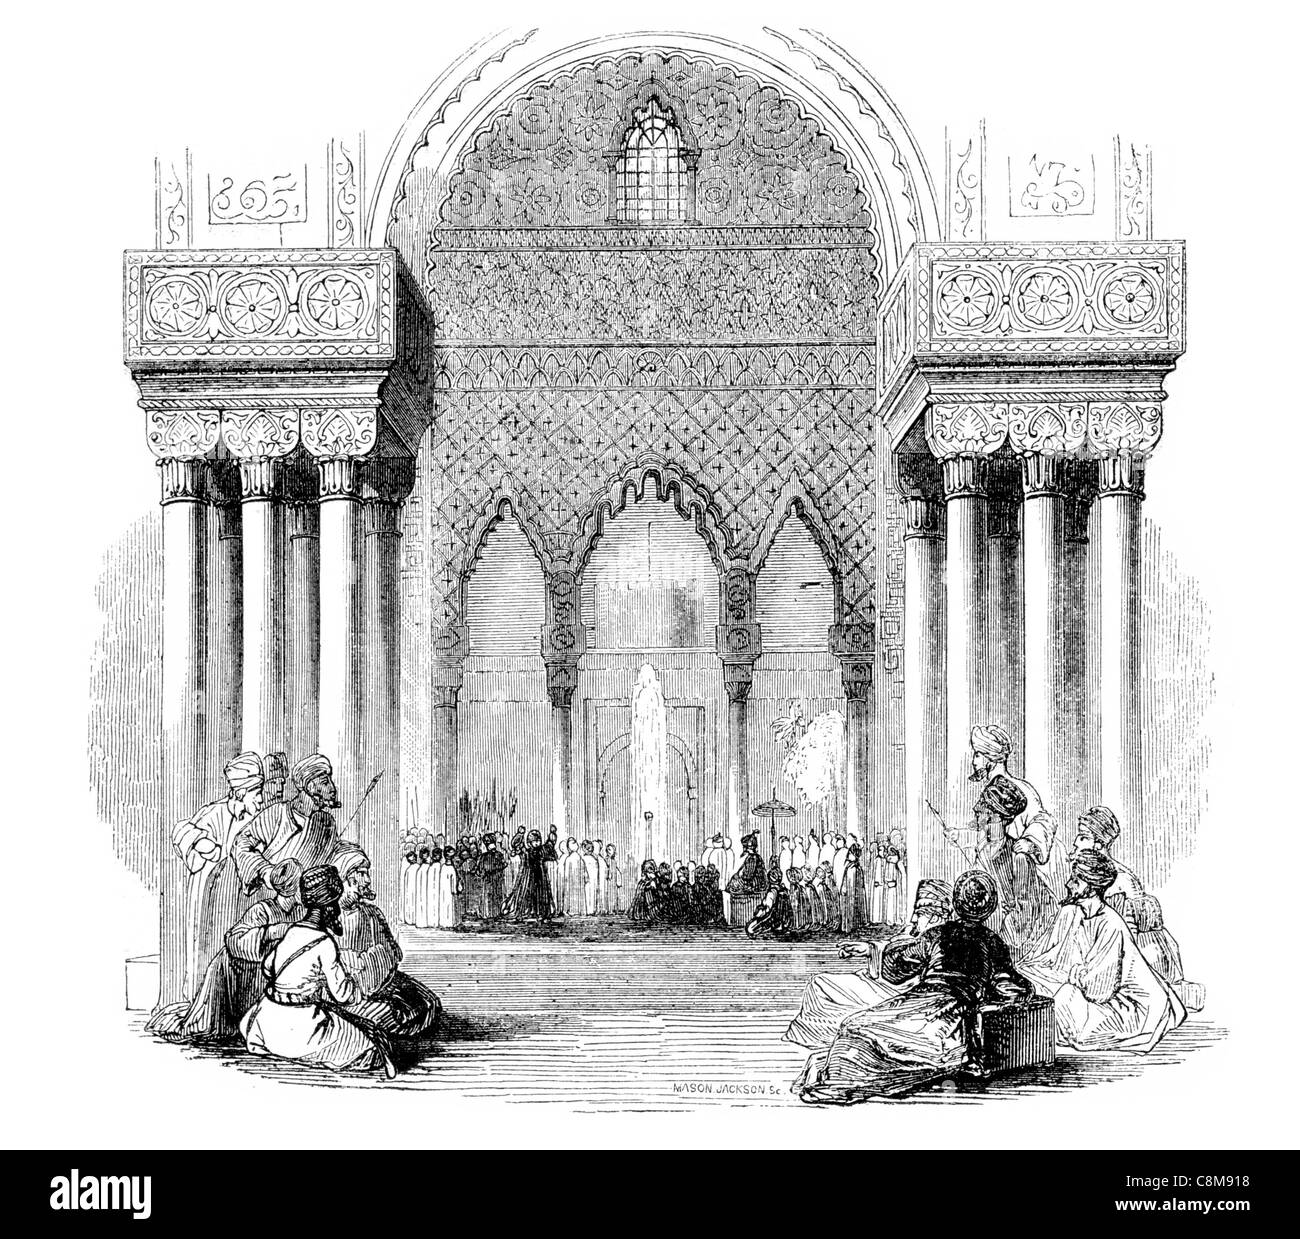 Hall saracenic Saracen Palace Turkish Islamic Chinese architecture culture Mosque Fort dome domed arched arch column crusade Stock Photo